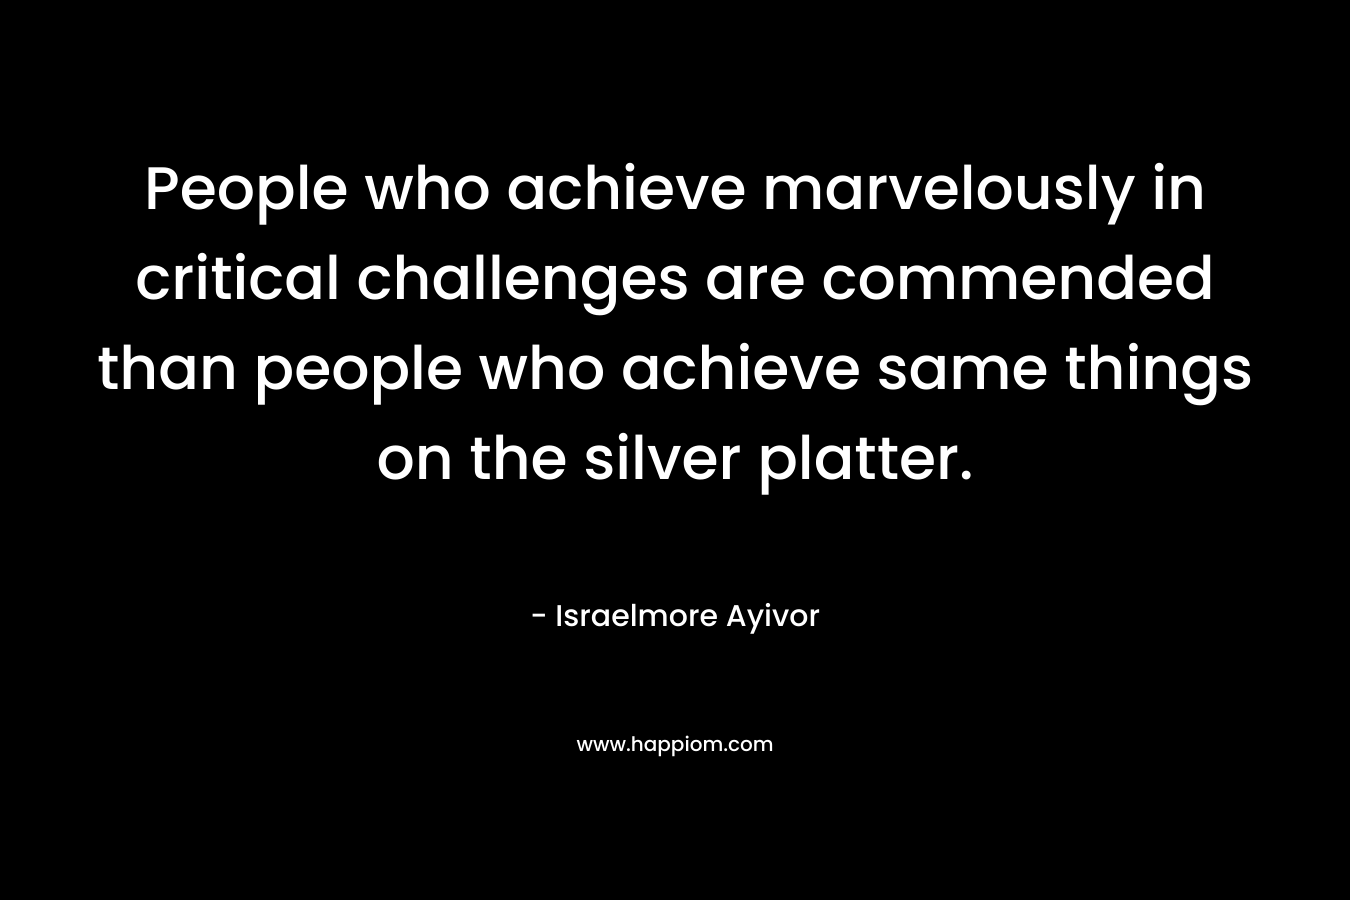 People who achieve marvelously in critical challenges are commended than people who achieve same things on the silver platter. – Israelmore Ayivor